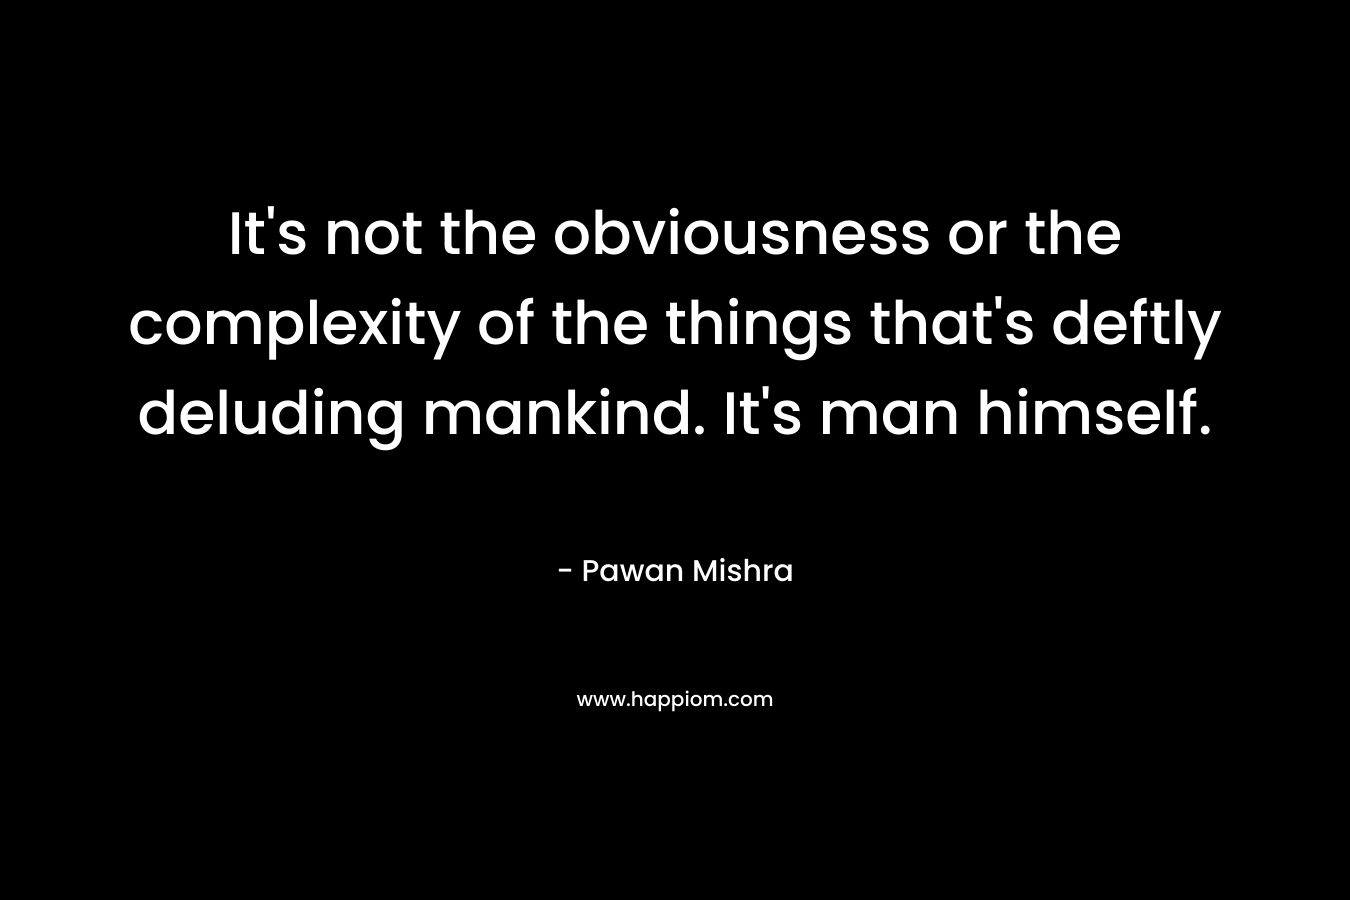 It’s not the obviousness or the complexity of the things that’s deftly deluding mankind. It’s man himself. – Pawan Mishra